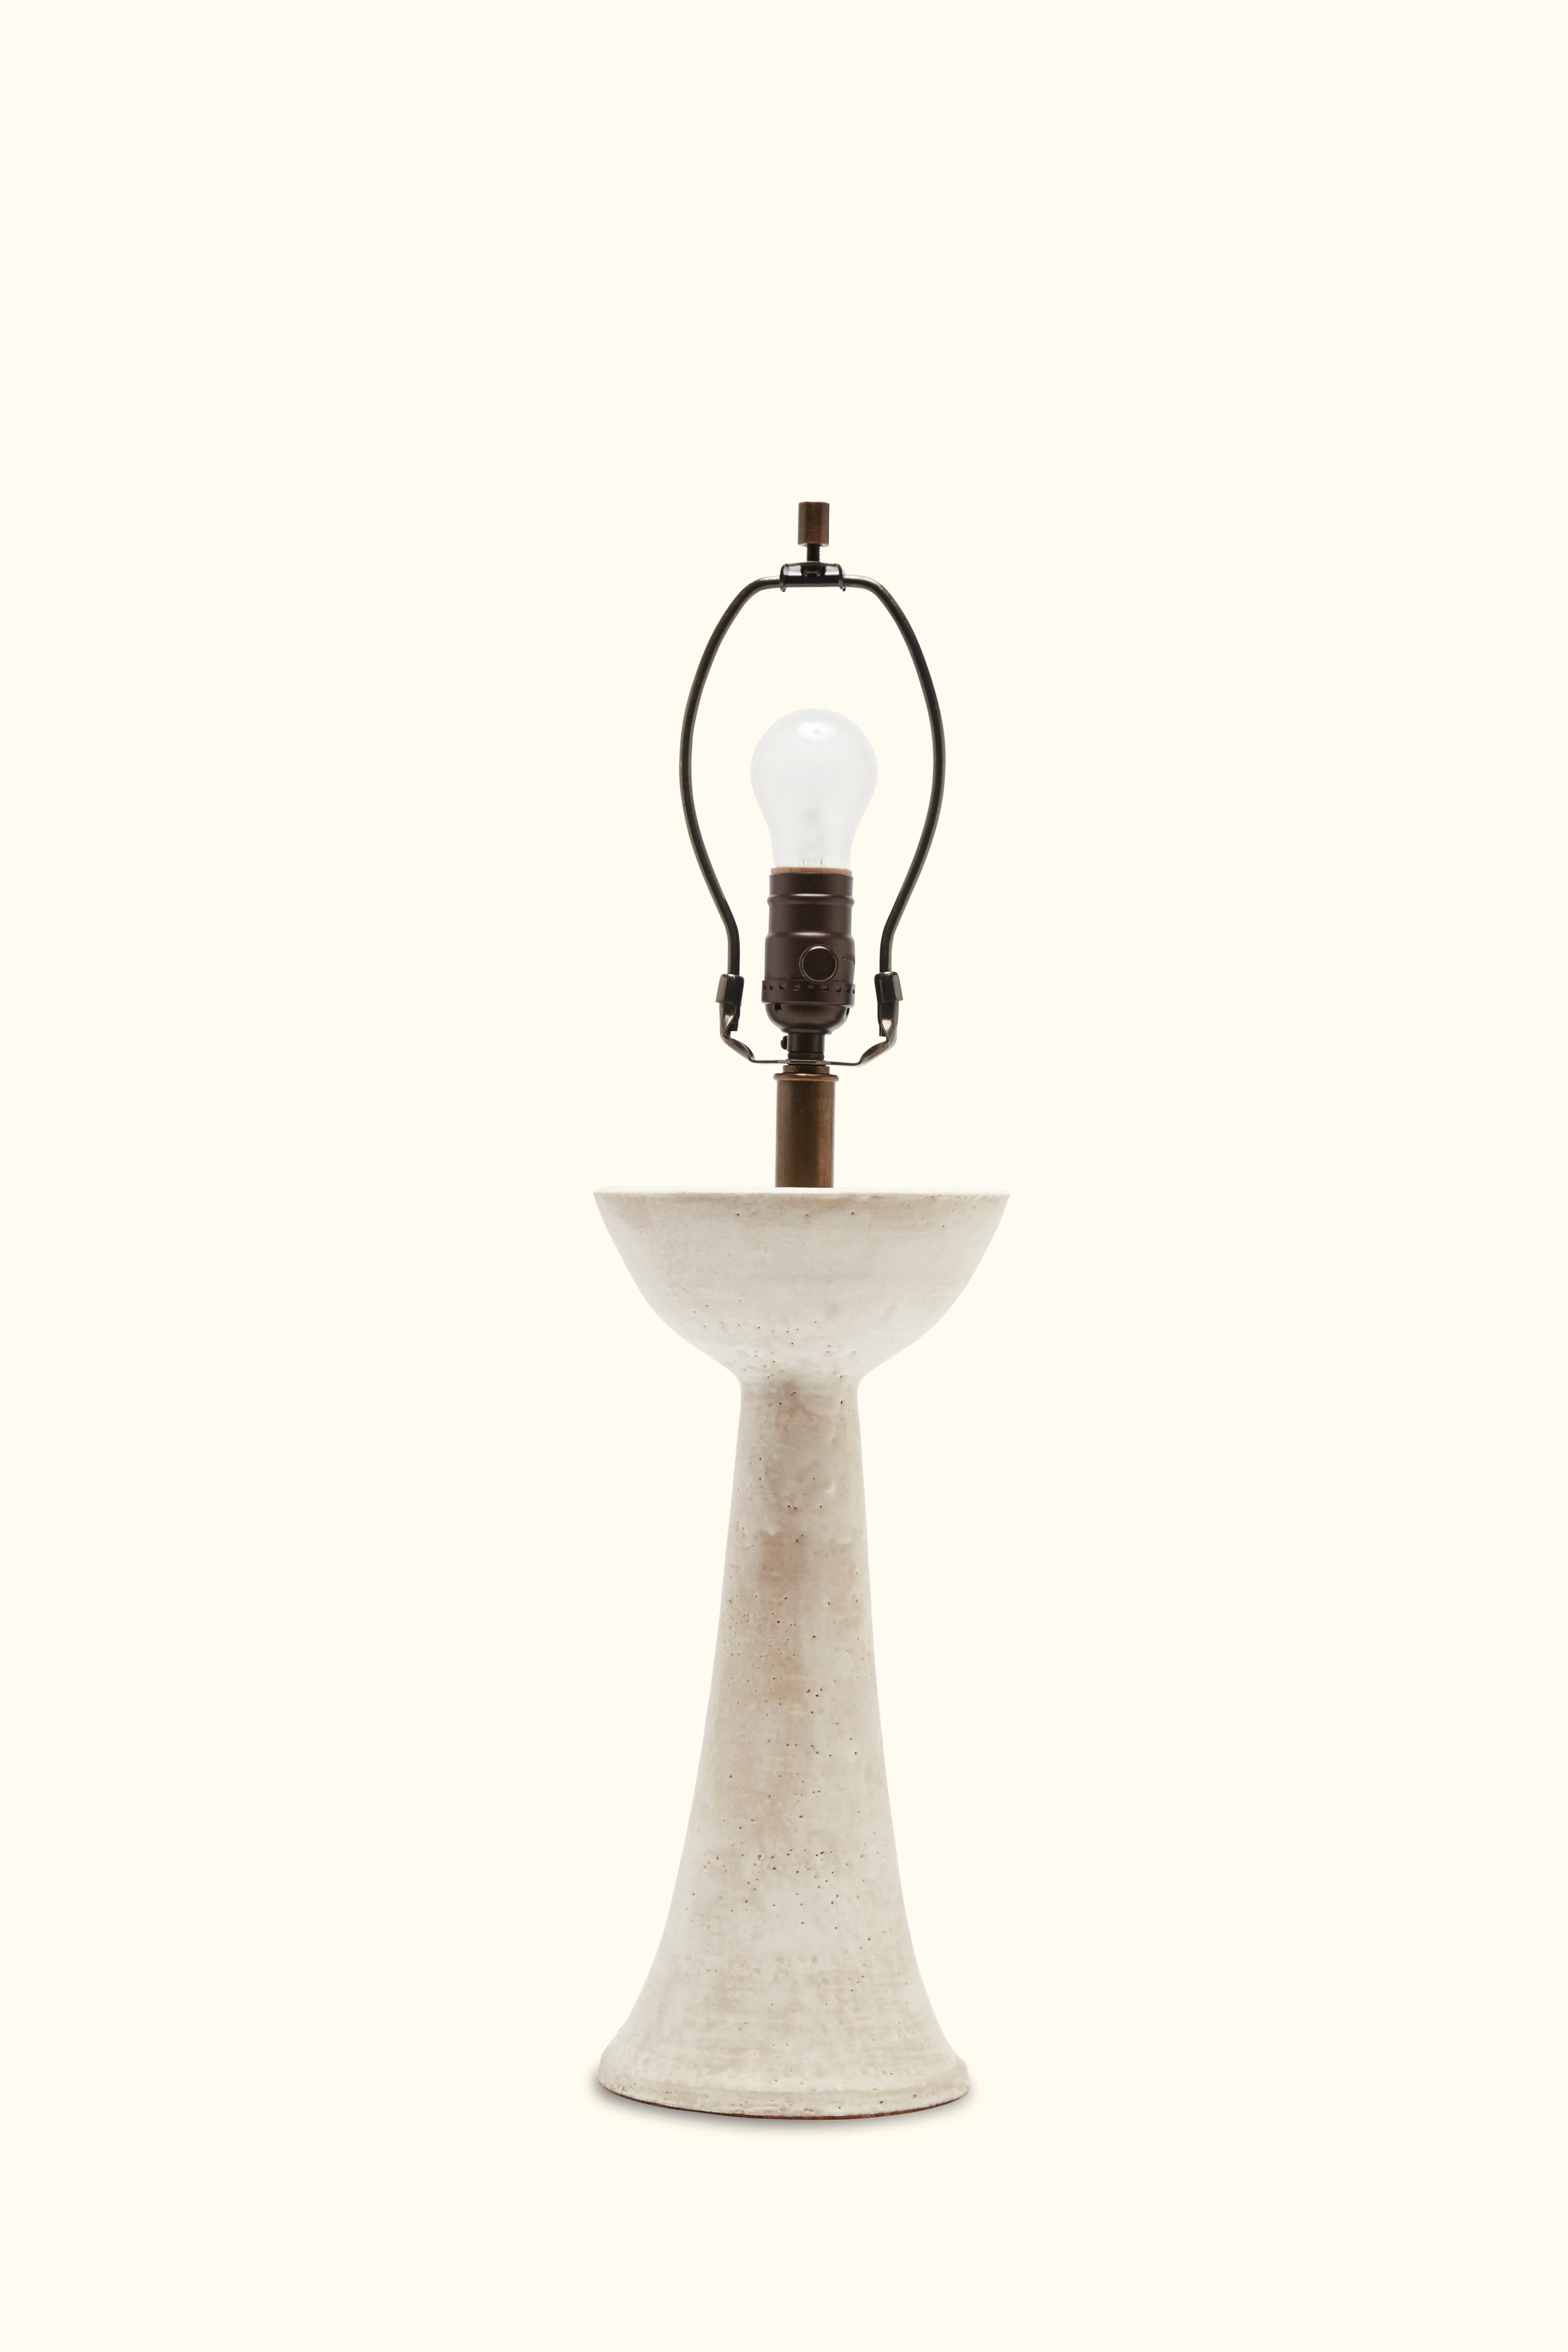 Seneca table lamp by ceramic artist Danny Kaplan. 

Shade included. Overall height to top of shade: 24